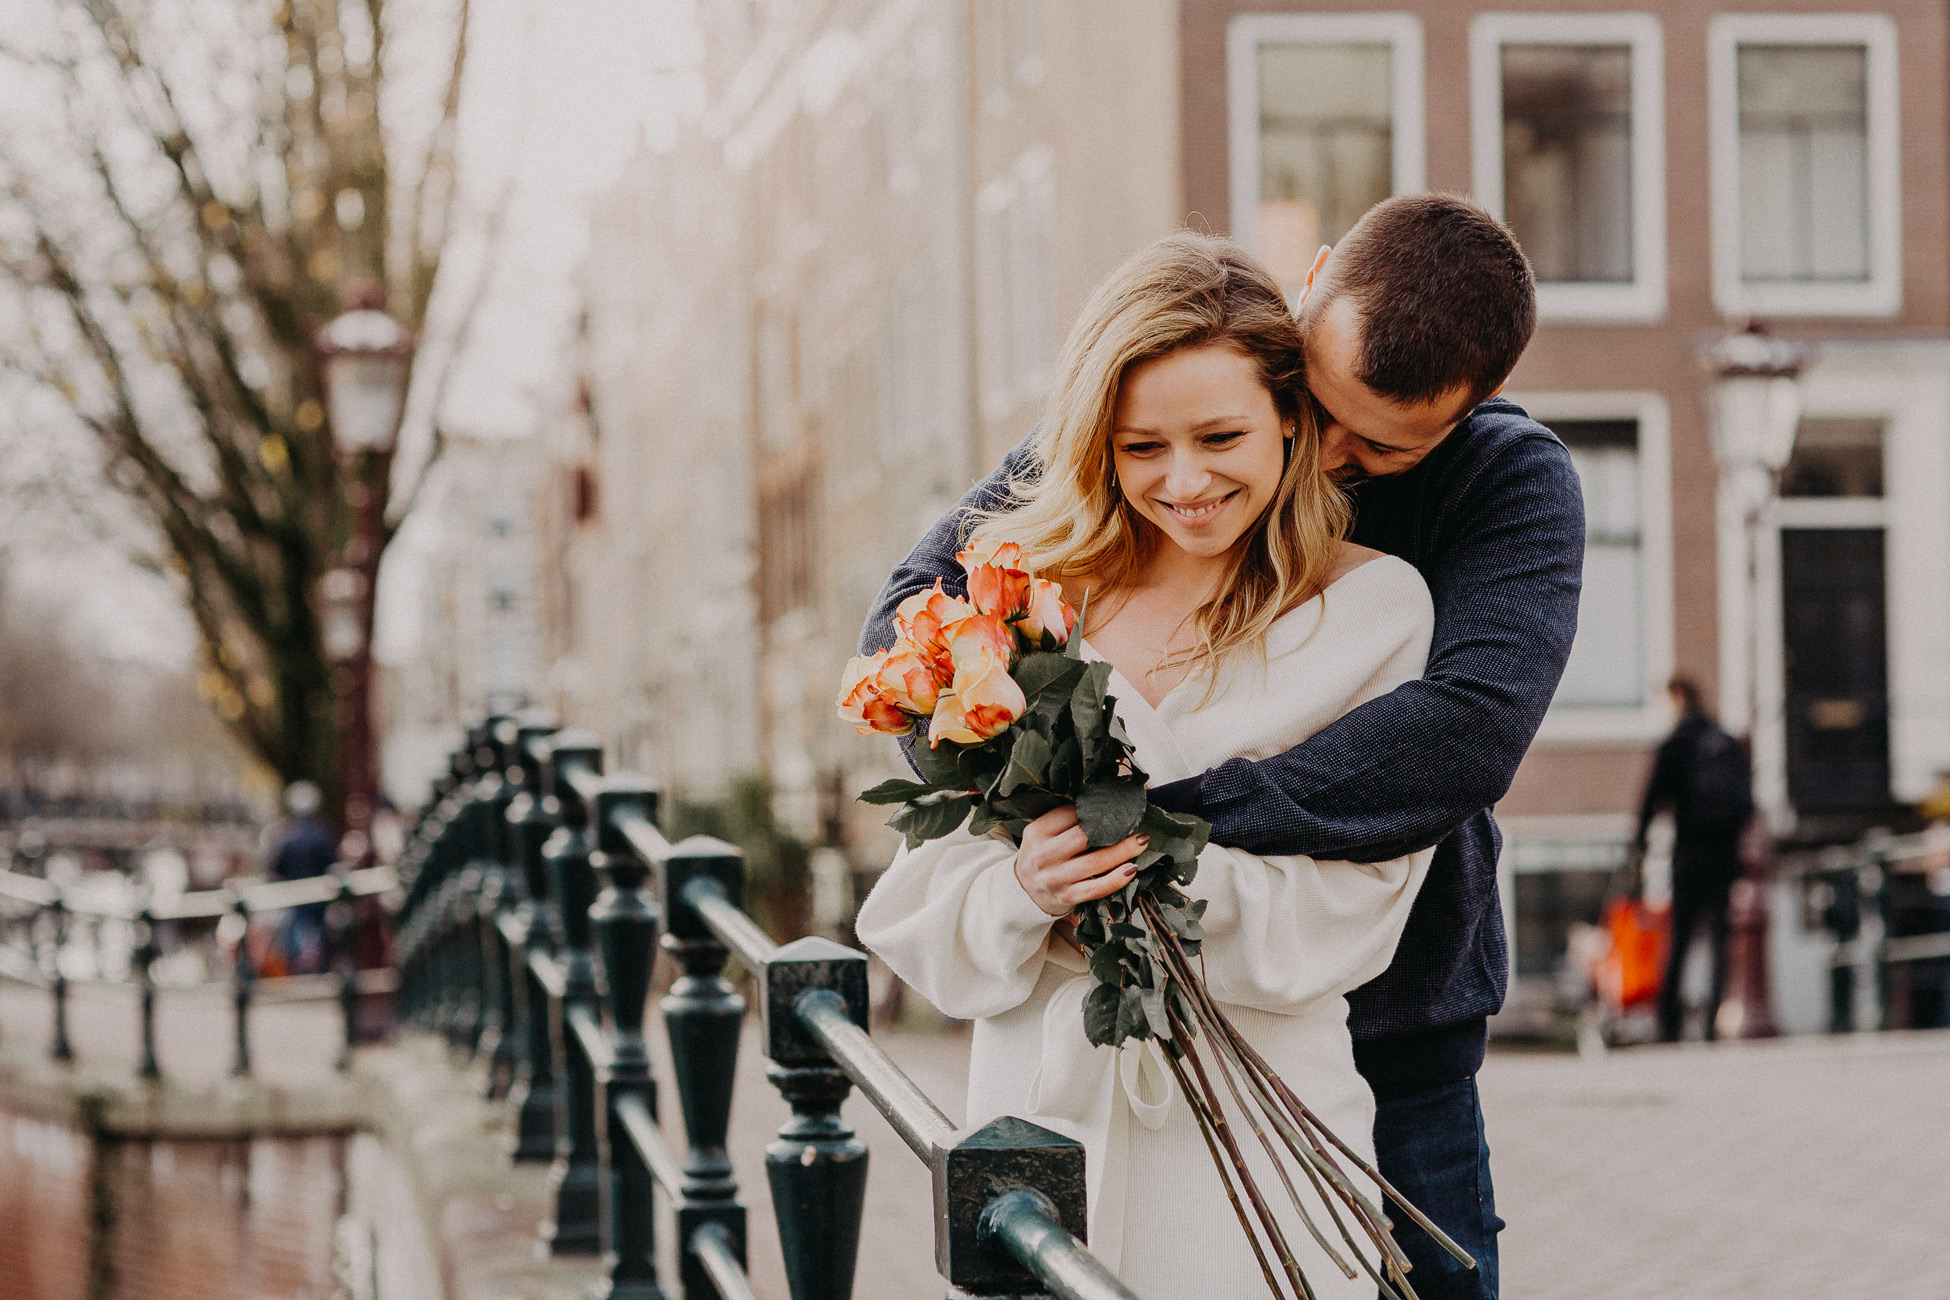 Married couple is posing on the bridge for a wedding photographer in Amsterdam. Man is hugging a woman from behind. She is smiling and carries orange roses.